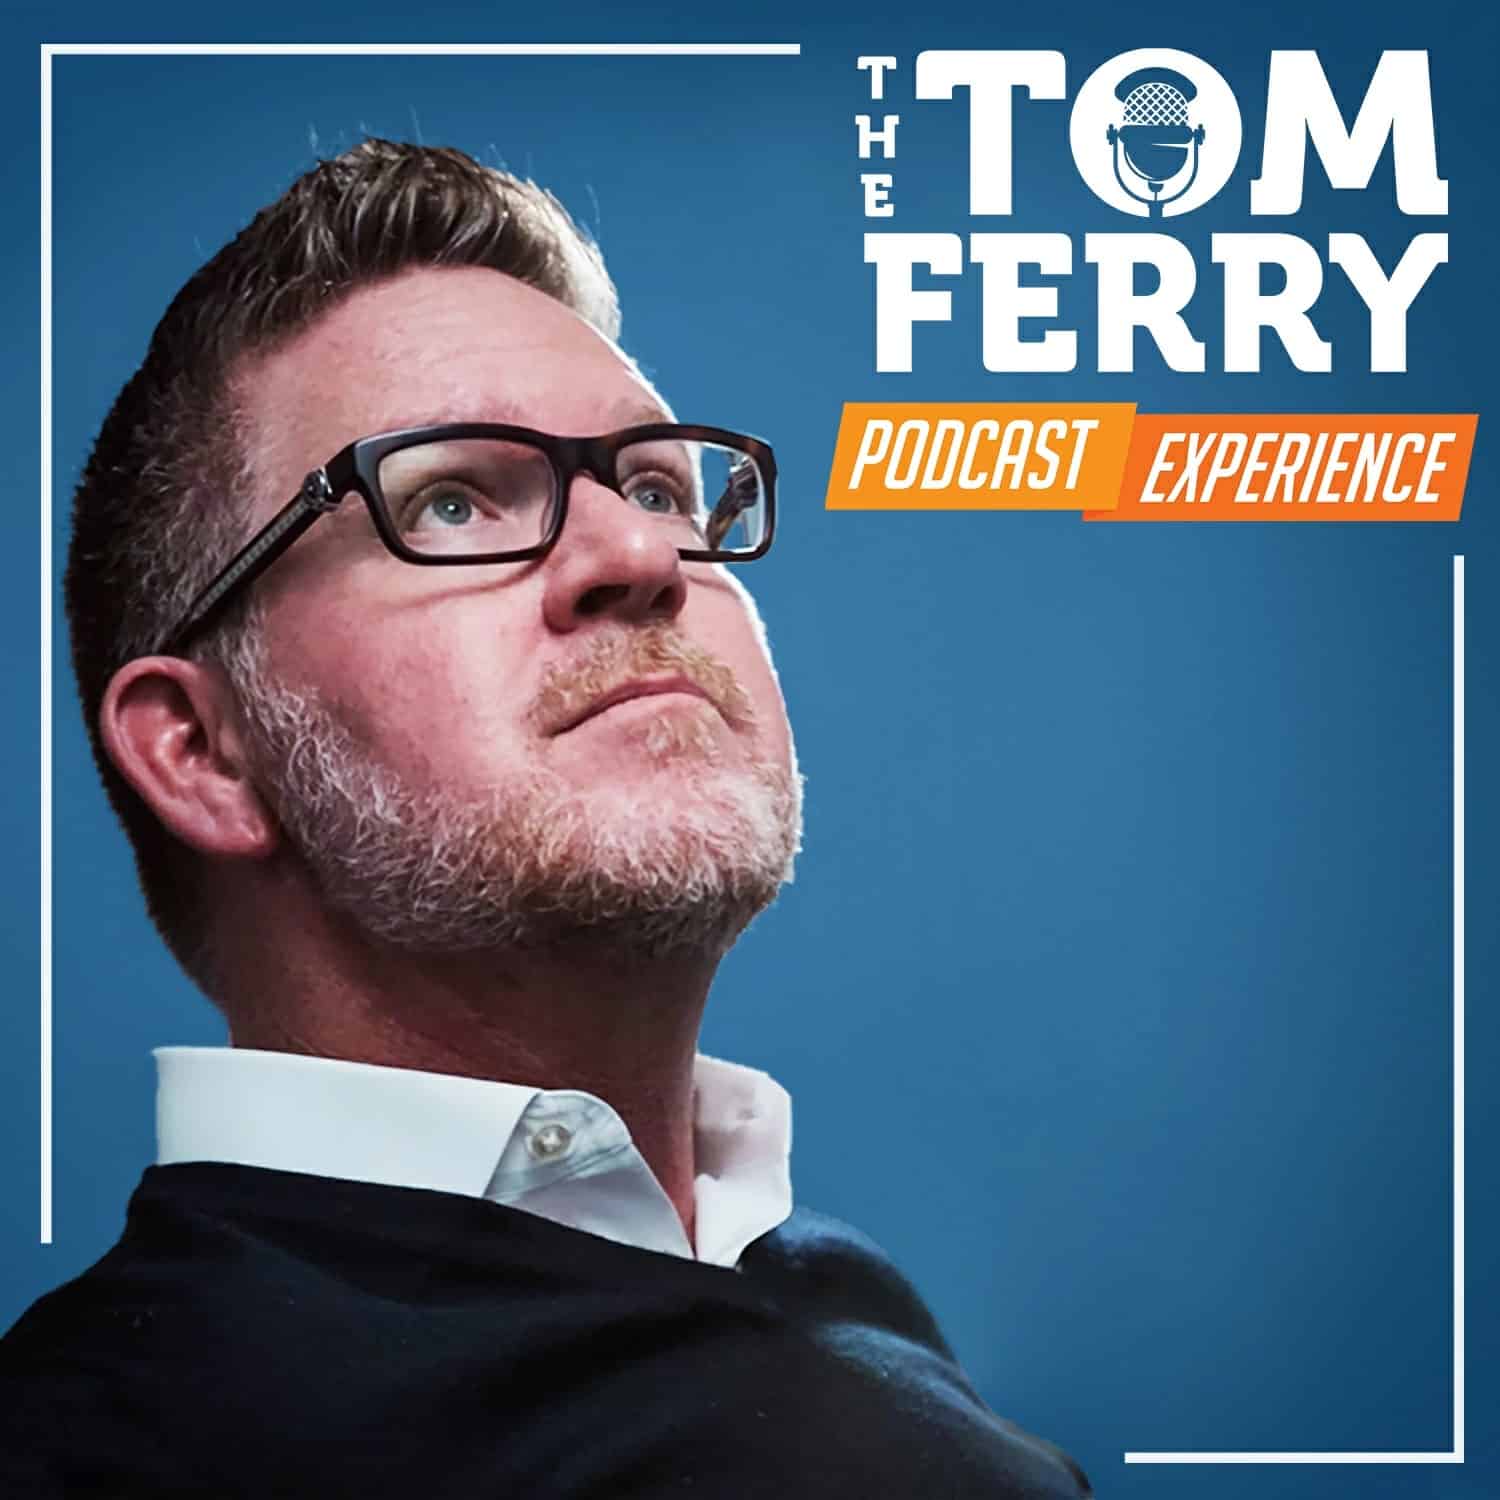 The Tom Ferry Podcast Experience